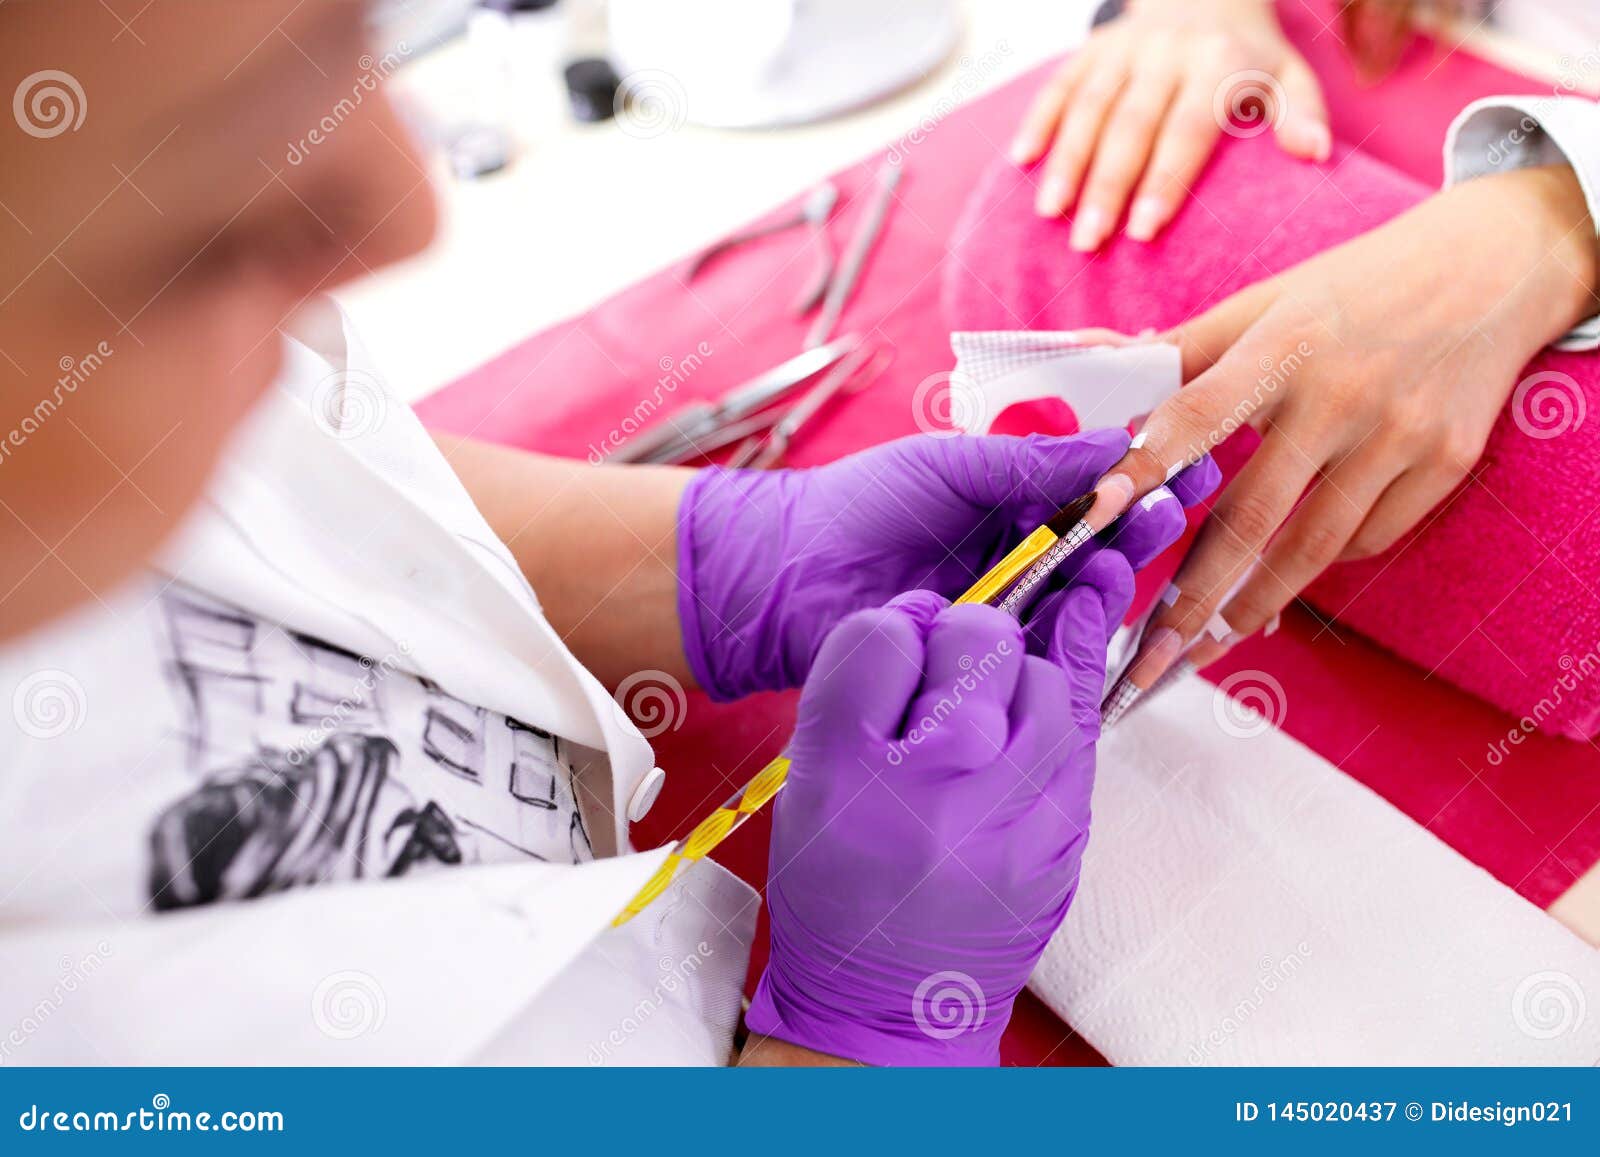 artificial nail enhancement being applied by the hands of an experienced manicure salon worker